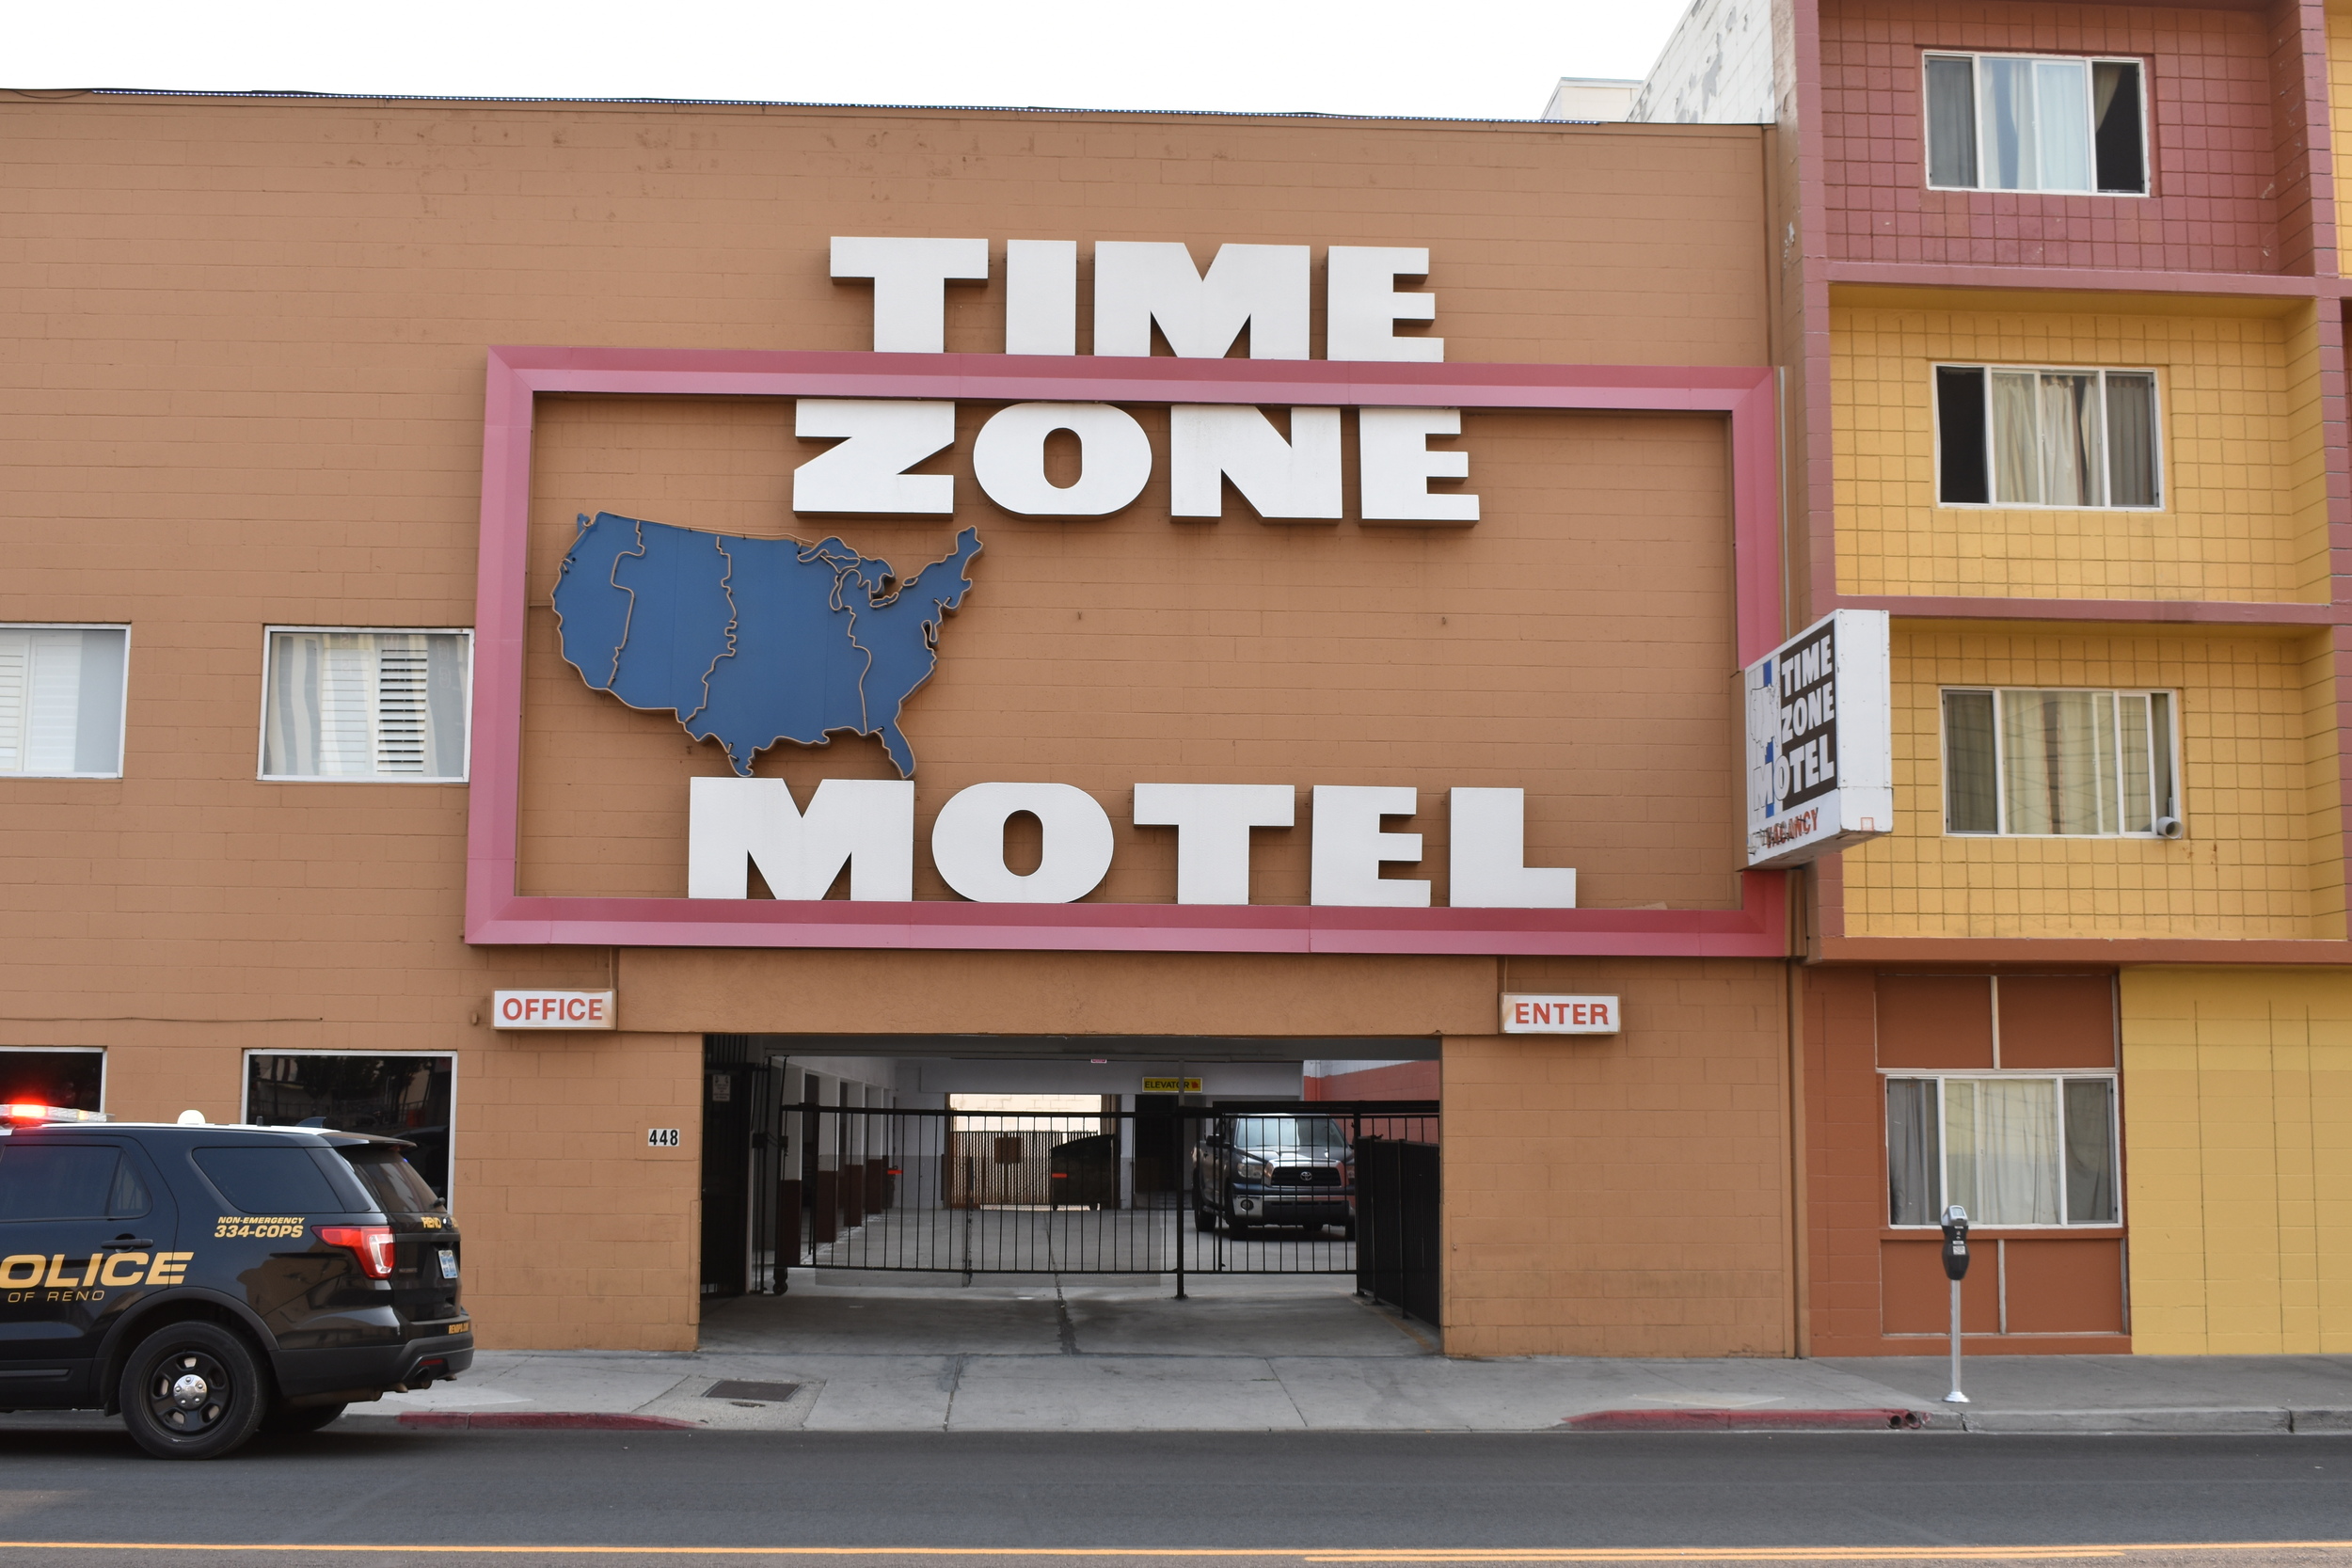 Time Zone Motel wall mounted sign, Reno, Nevada